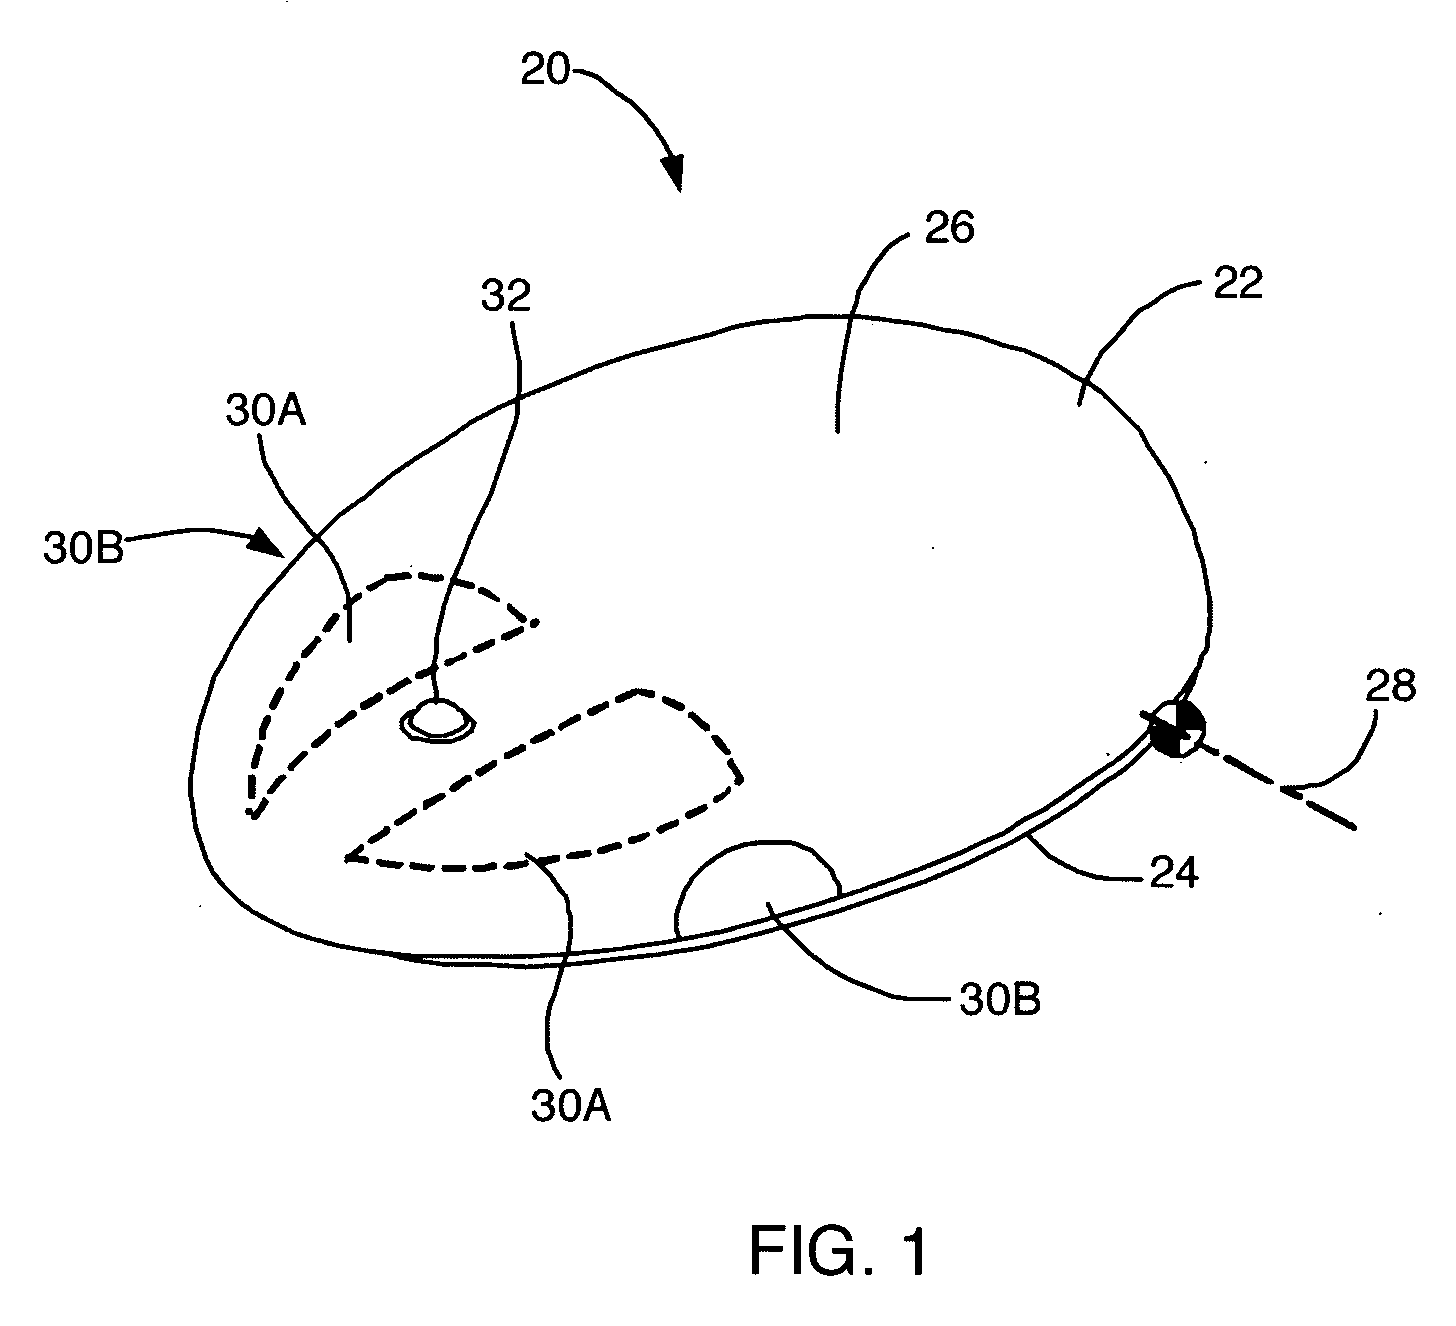 Mouse with improved input mechanisms